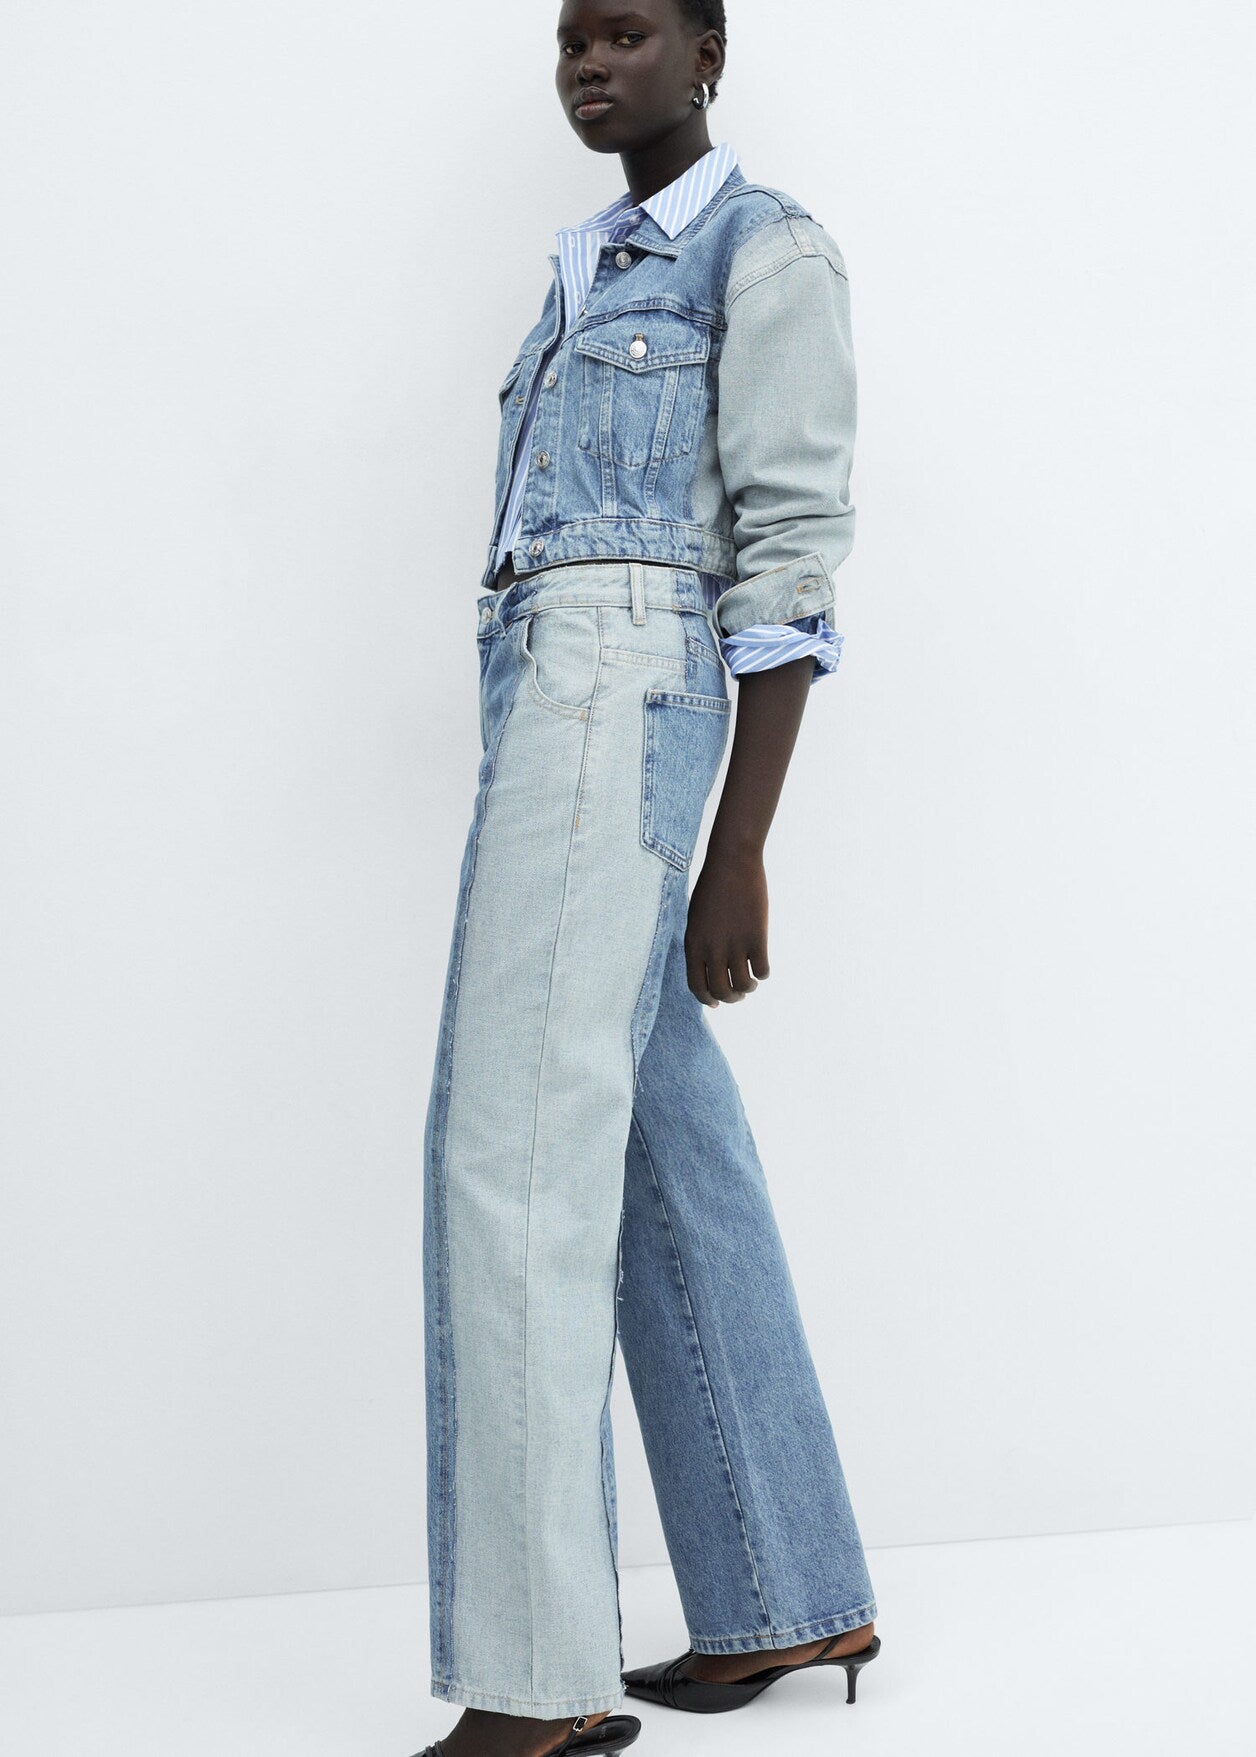 Two-tone straight jeans